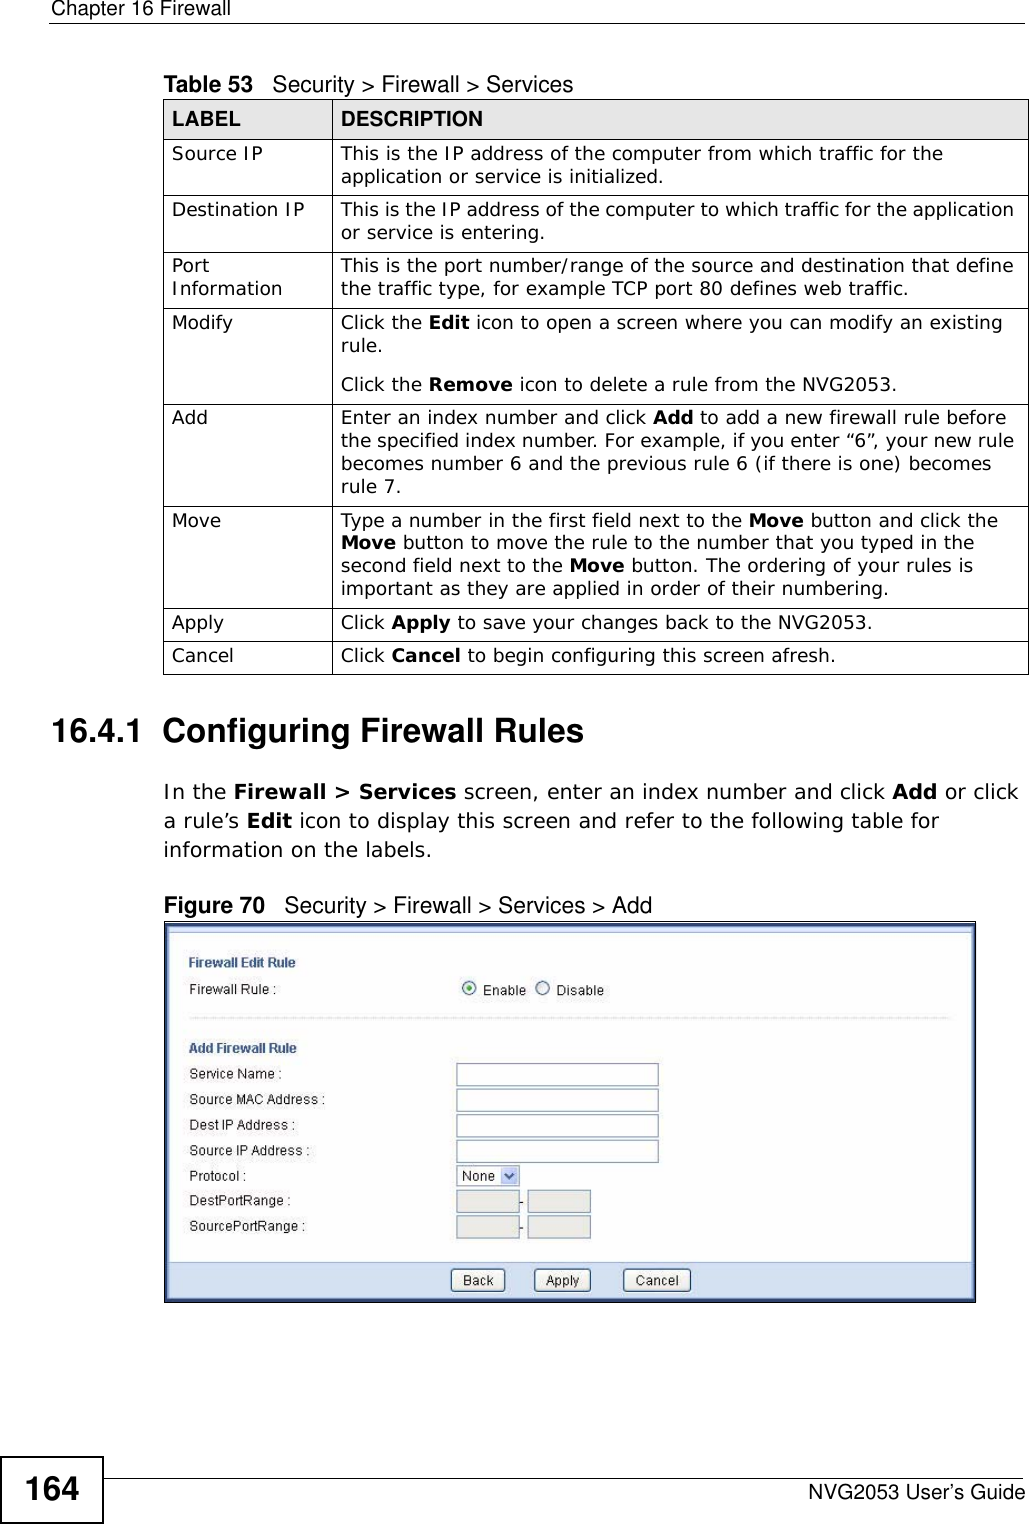 Chapter 16 FirewallNVG2053 User’s Guide16416.4.1  Configuring Firewall Rules   In the Firewall &gt; Services screen, enter an index number and click Add or click a rule’s Edit icon to display this screen and refer to the following table for information on the labels.Figure 70   Security &gt; Firewall &gt; Services &gt; AddSource IP This is the IP address of the computer from which traffic for the application or service is initialized. Destination IP This is the IP address of the computer to which traffic for the application or service is entering. Port Information This is the port number/range of the source and destination that define the traffic type, for example TCP port 80 defines web traffic.Modify Click the Edit icon to open a screen where you can modify an existing rule. Click the Remove icon to delete a rule from the NVG2053.Add Enter an index number and click Add to add a new firewall rule before the specified index number. For example, if you enter “6”, your new rule becomes number 6 and the previous rule 6 (if there is one) becomes rule 7.Move Type a number in the first field next to the Move button and click the Move button to move the rule to the number that you typed in the second field next to the Move button. The ordering of your rules is important as they are applied in order of their numbering.Apply Click Apply to save your changes back to the NVG2053.Cancel Click Cancel to begin configuring this screen afresh.Table 53   Security &gt; Firewall &gt; ServicesLABEL DESCRIPTION